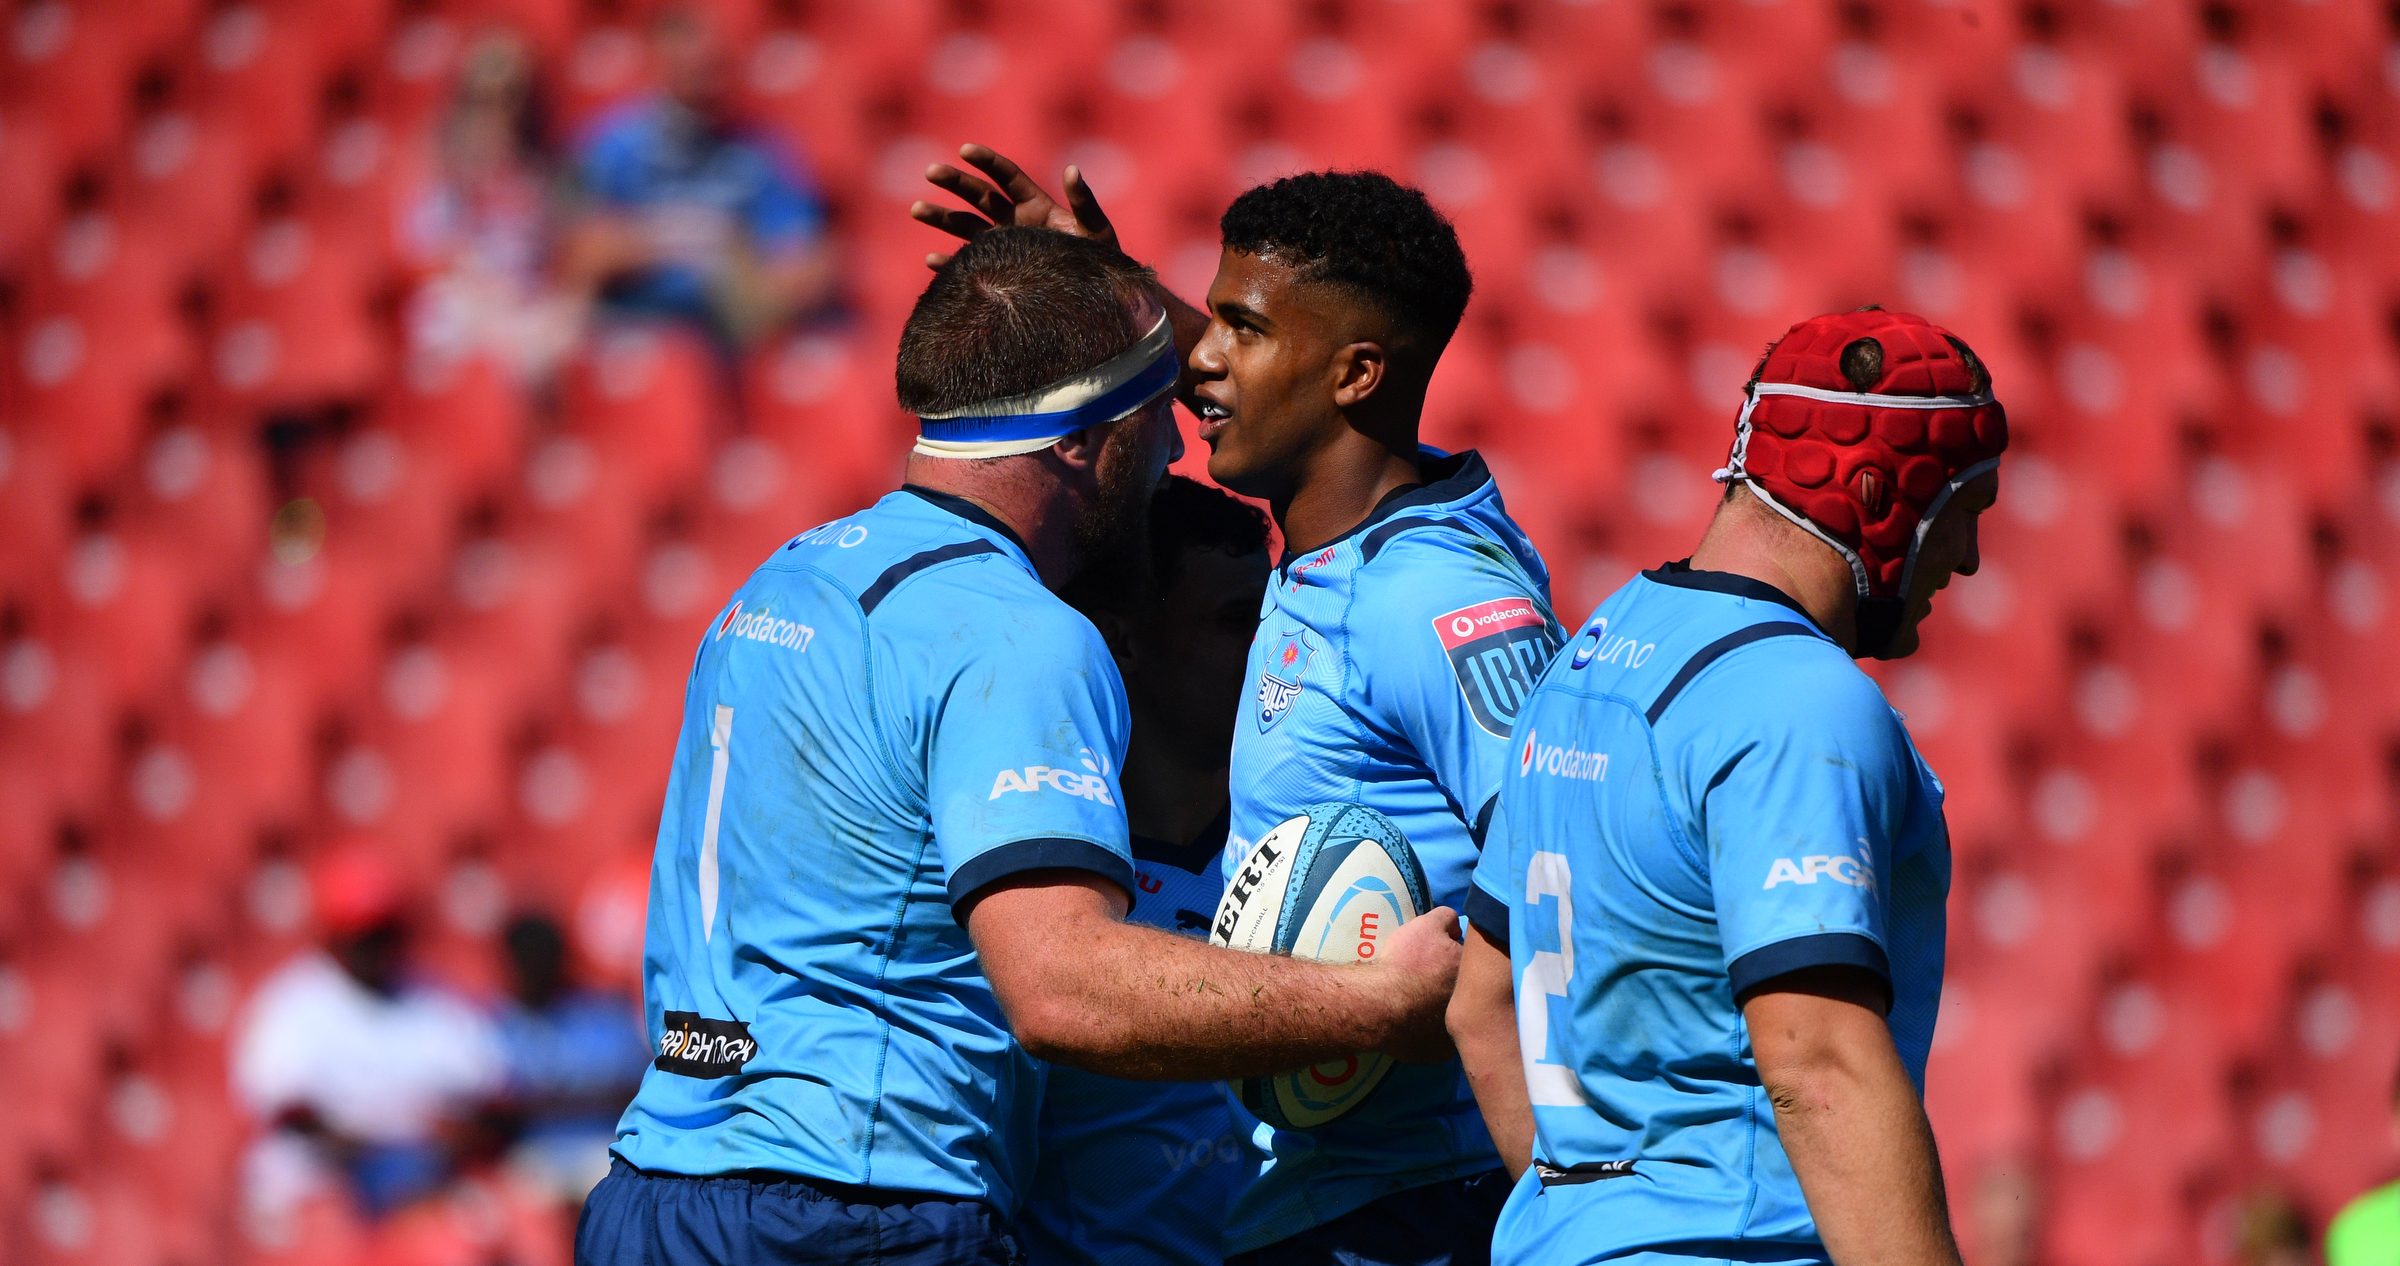 Vodacom United Rugby Championship ROUND 17 WEEKEND-WRAP-UP